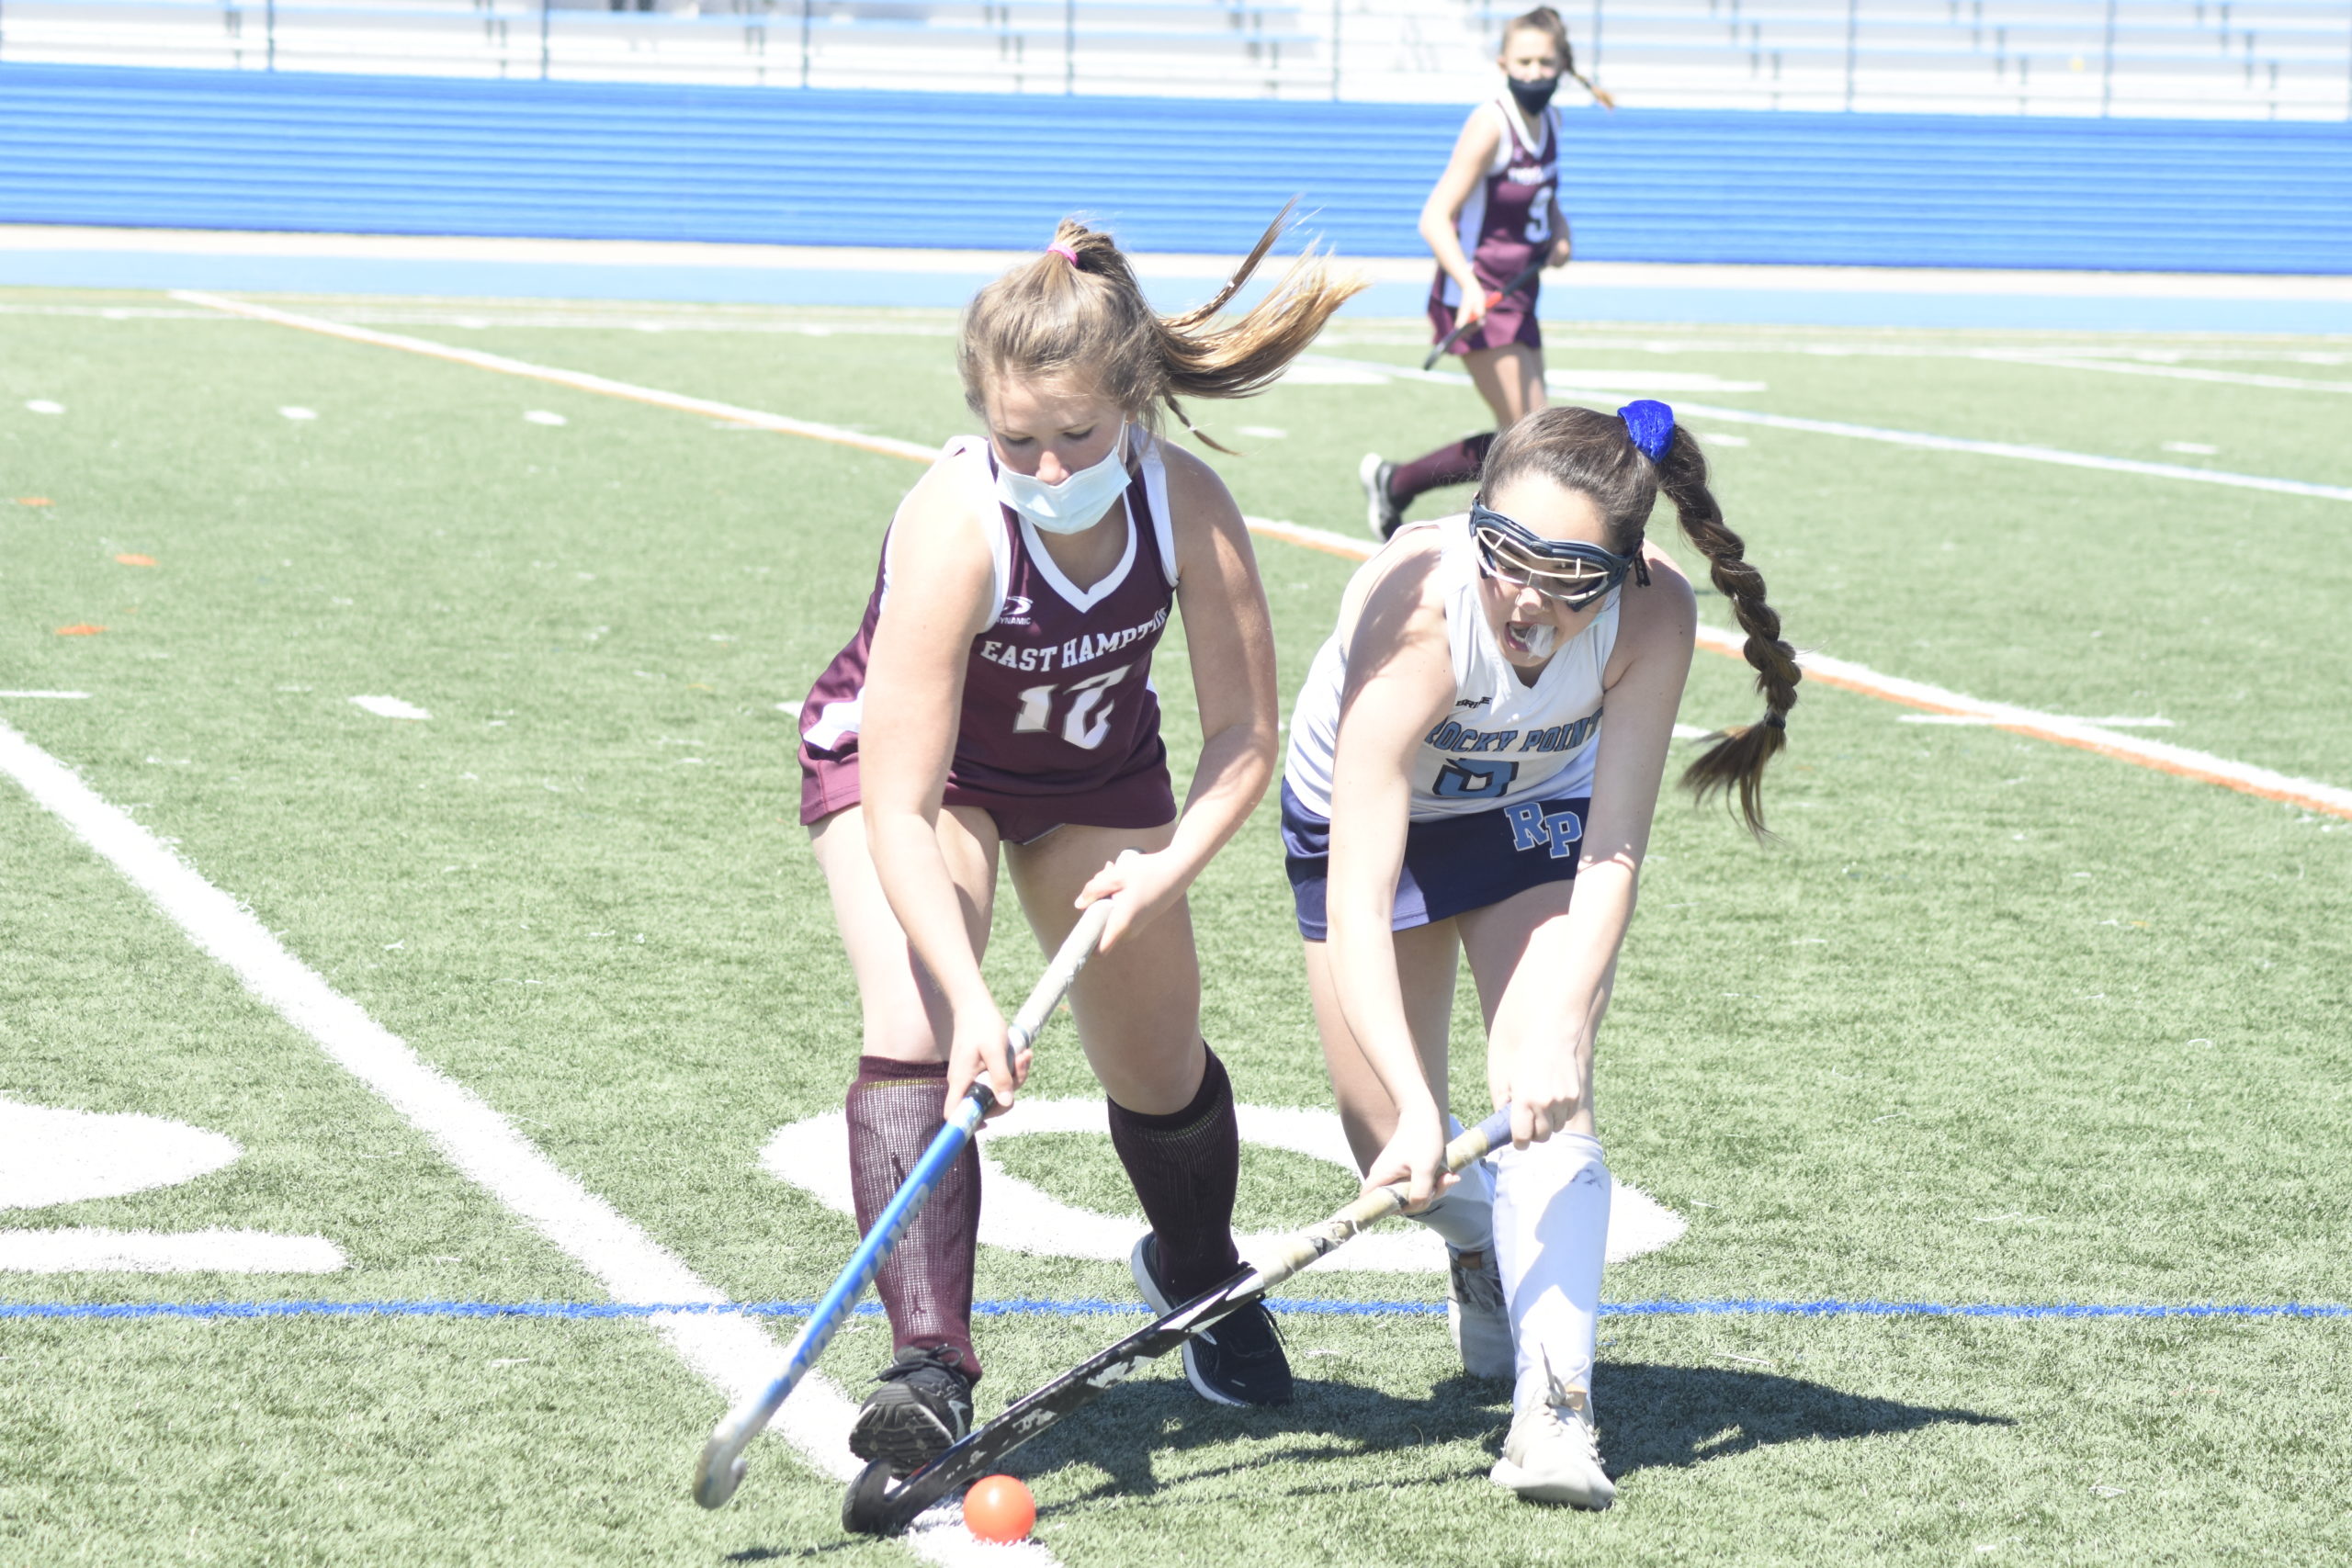 East Hampton junior Arabella Kuplins and a Rocky Point player go for the ball.